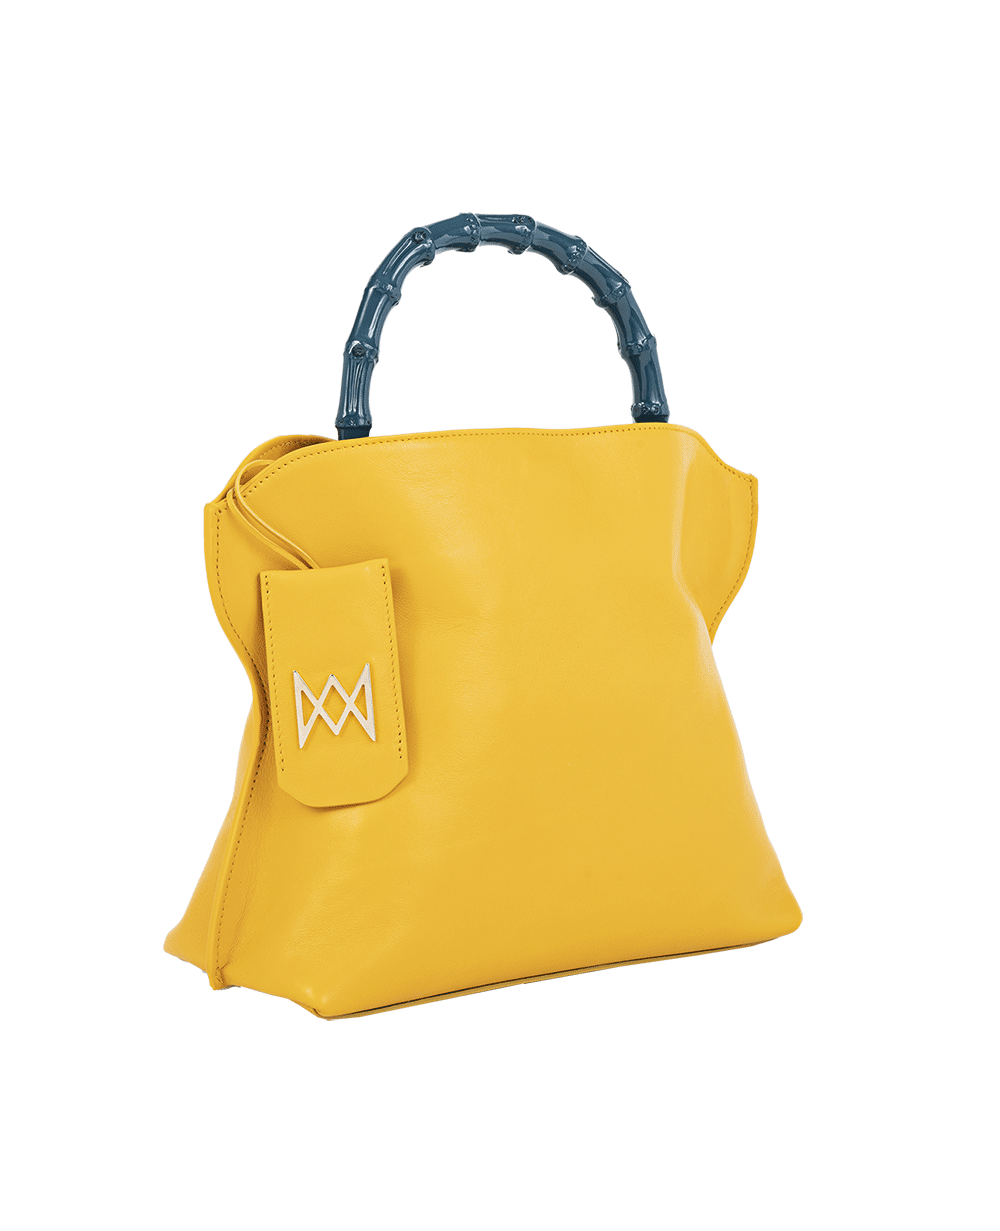 Cross-body bag in calf leather with detachable shoulder strap. Bamboo handles. Made In Italy. Two compartments, zip pocket in the back compartment. Magnetic flap closure with logo. Color: Saffron. Size: Large